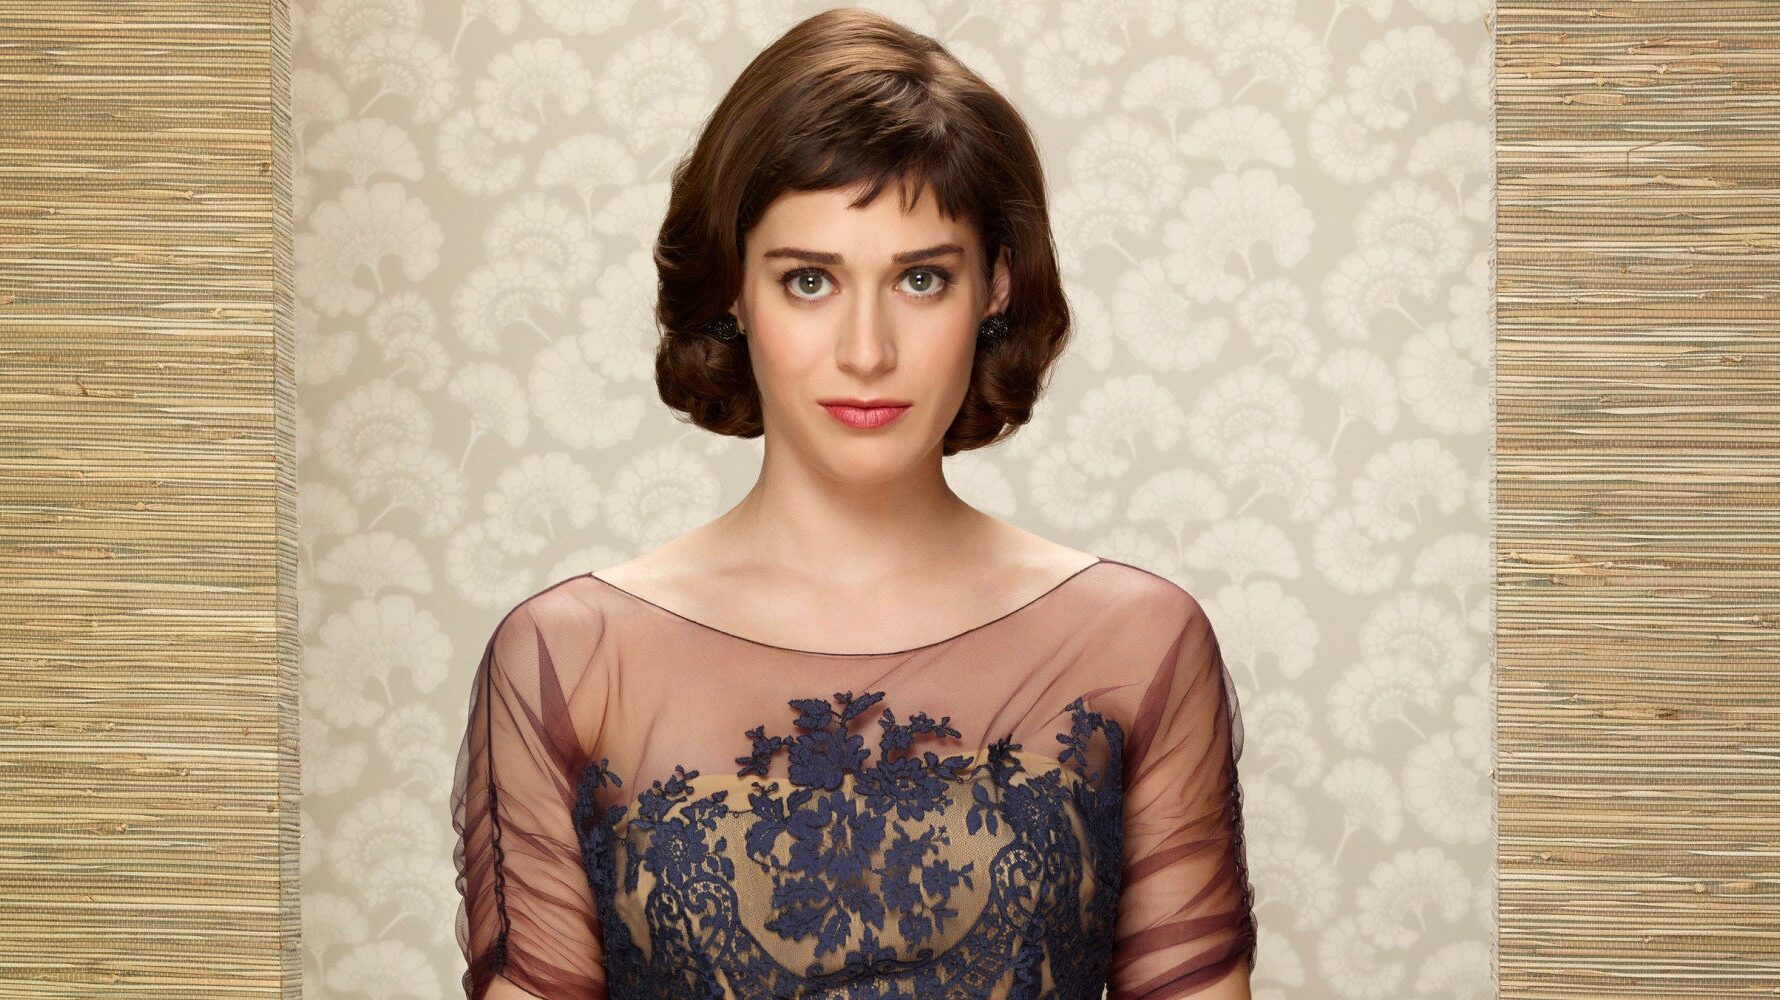 Lizzy Caplan And Her Relaxed View On Nudity After Experience.